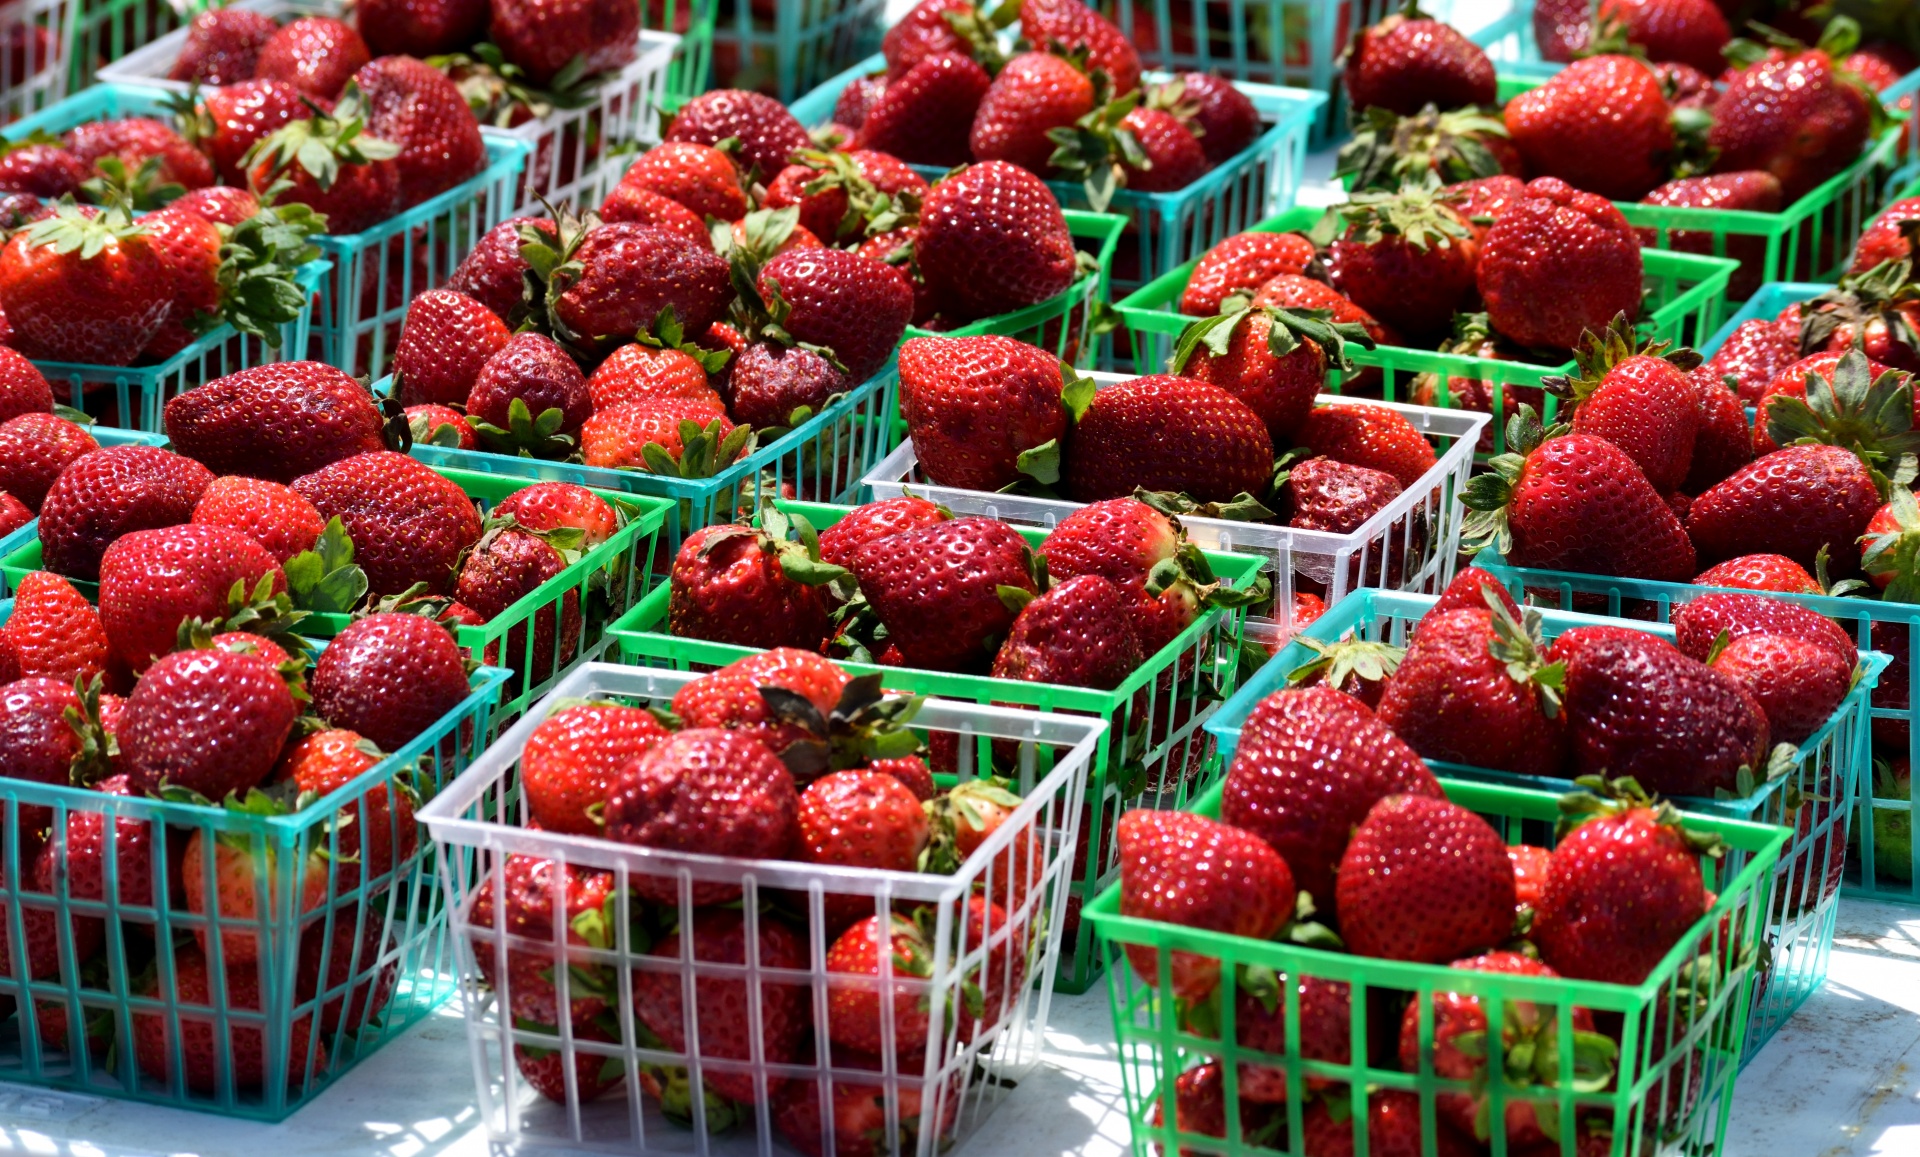 Strawberries sold at outdoor market place